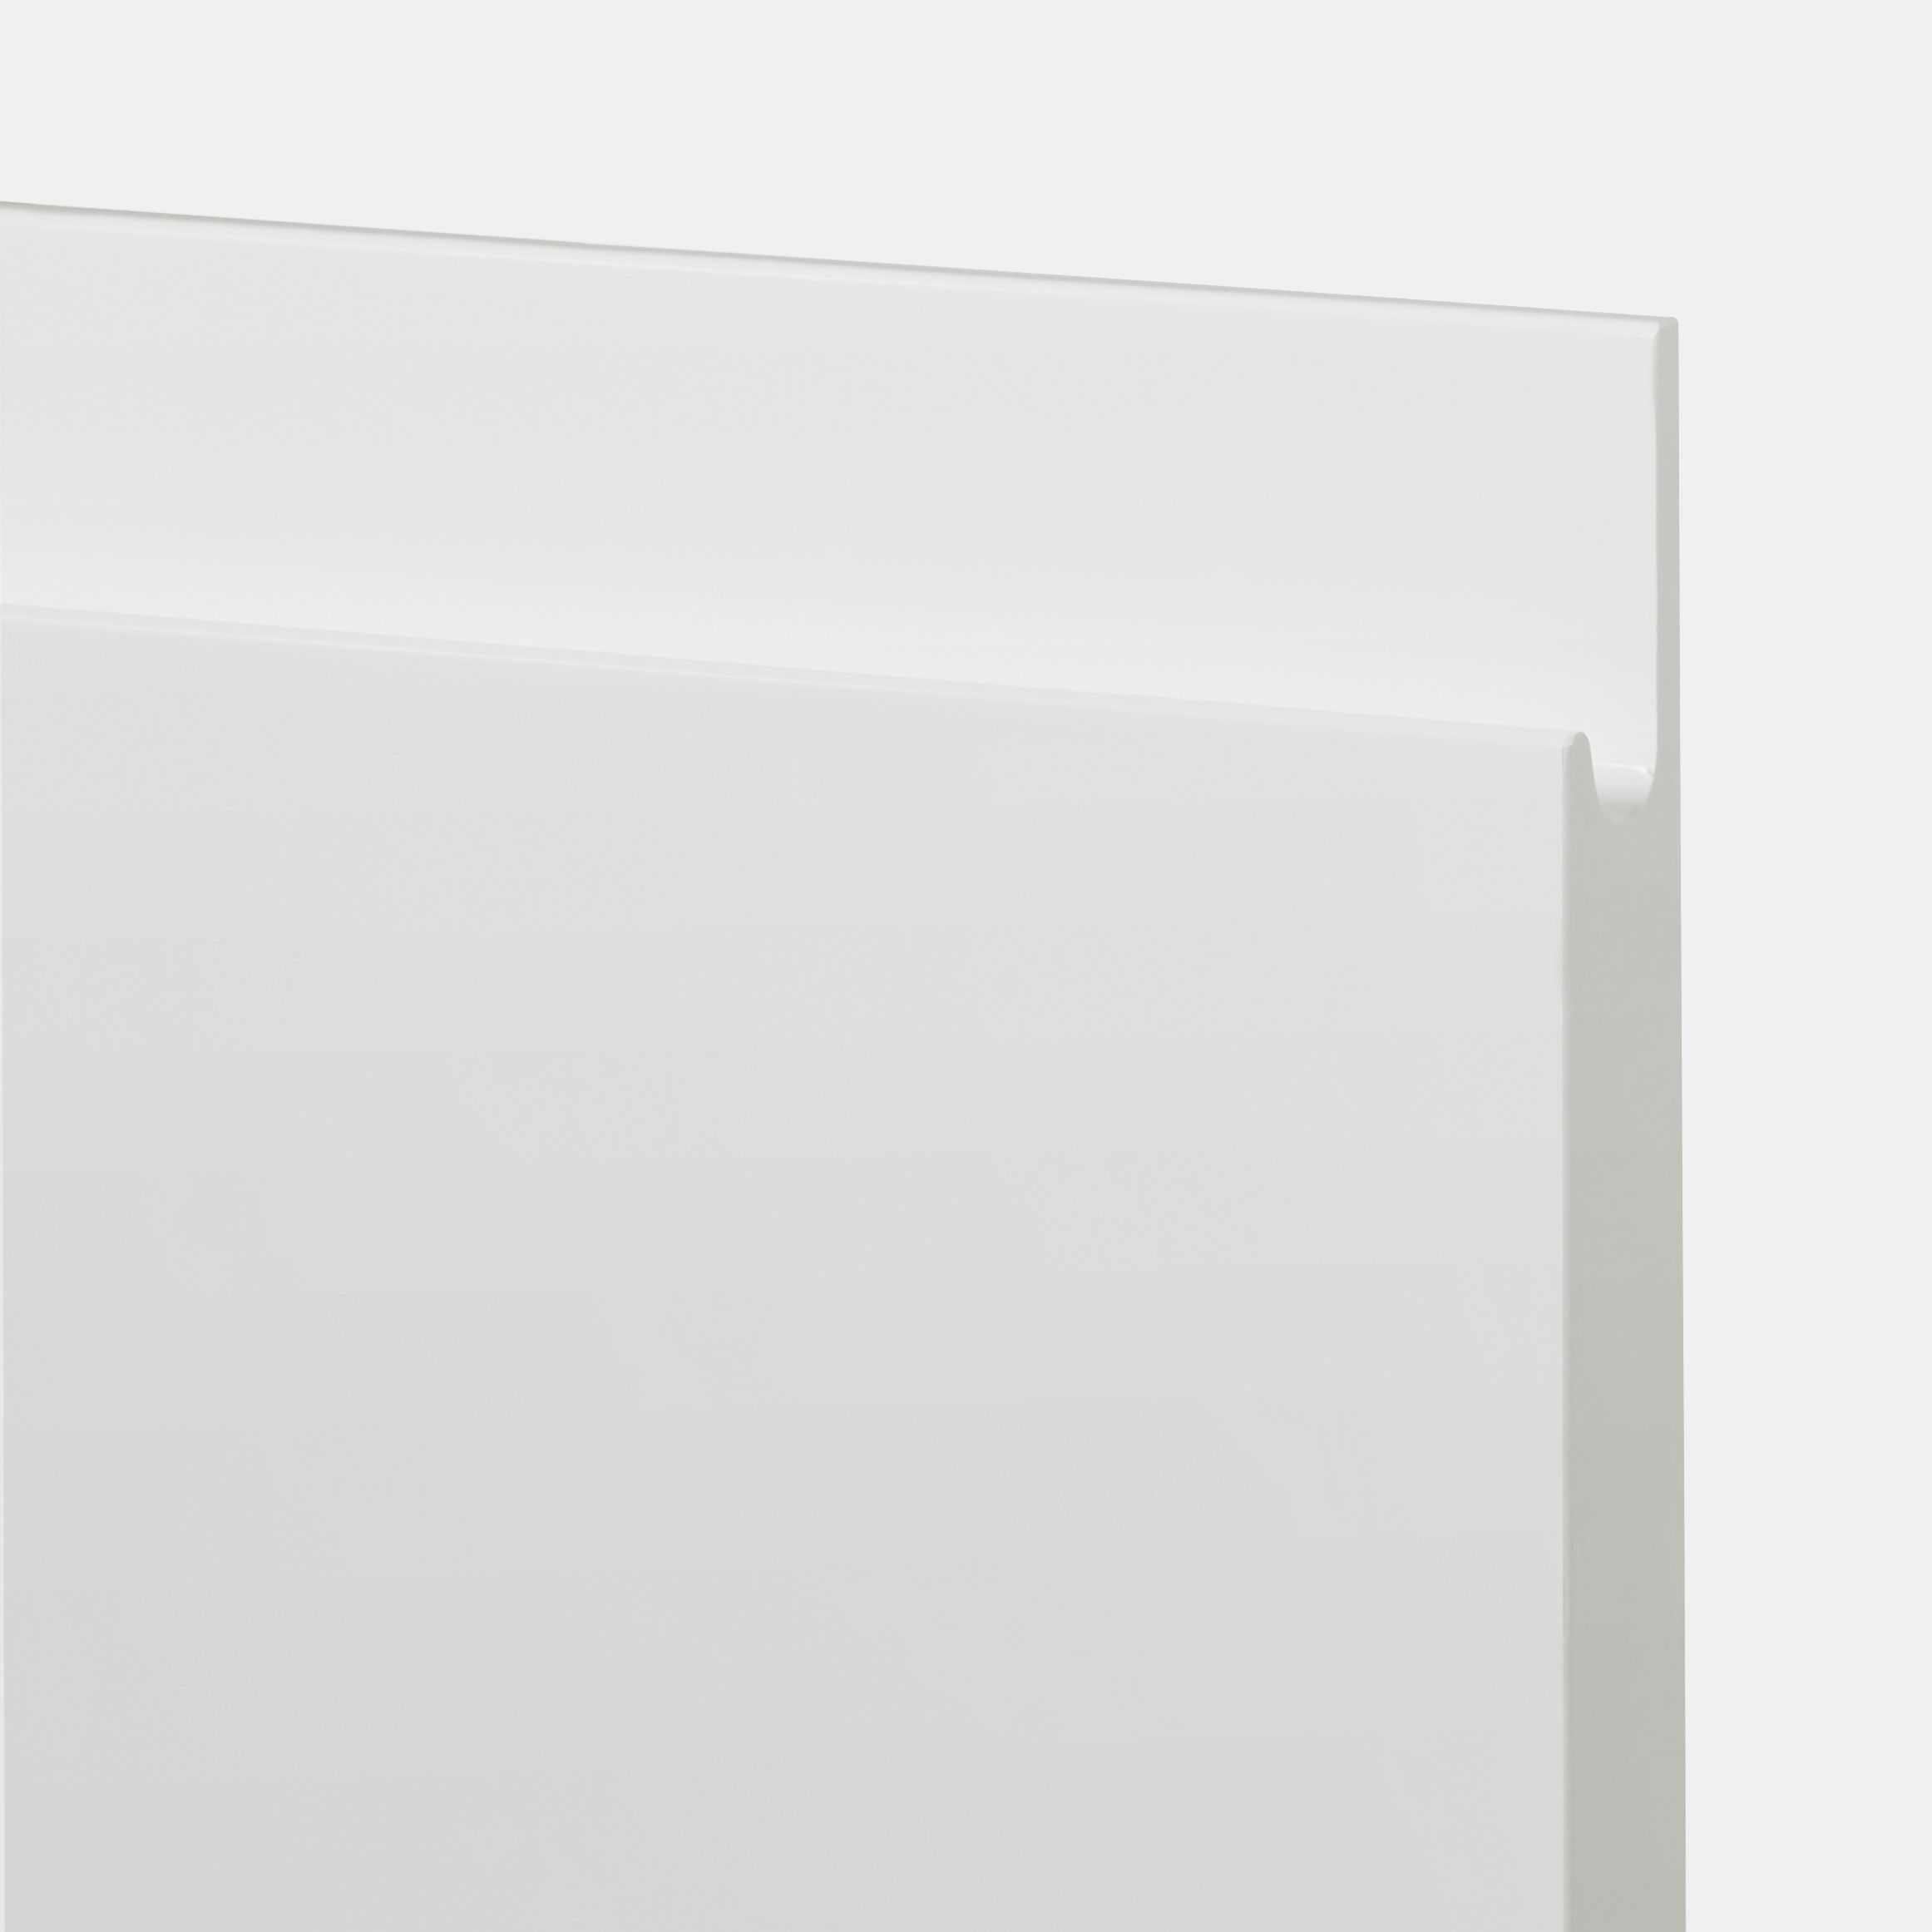 GoodHome Garcinia Gloss white integrated handle Highline Cabinet door (W)450mm (H)715mm (T)19mm